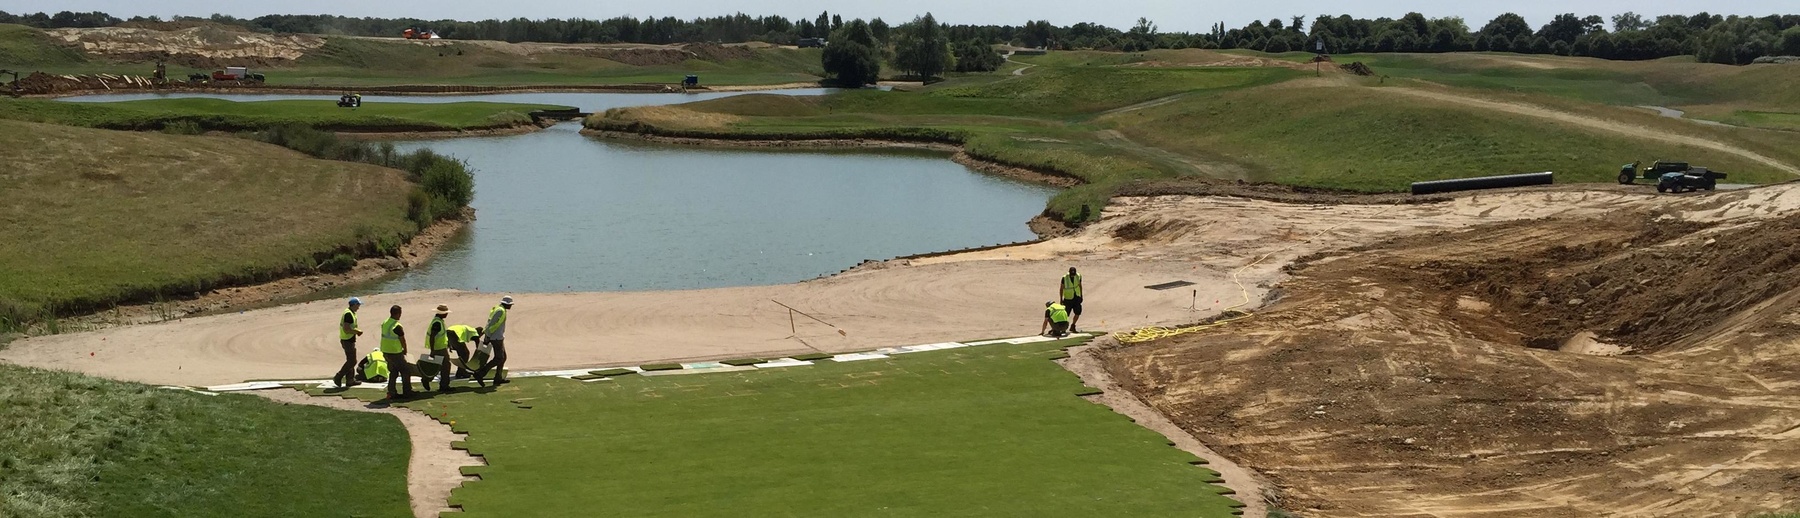 LGN refurbishment work on the course shown cropthree years ago is now paying off with just a month to go